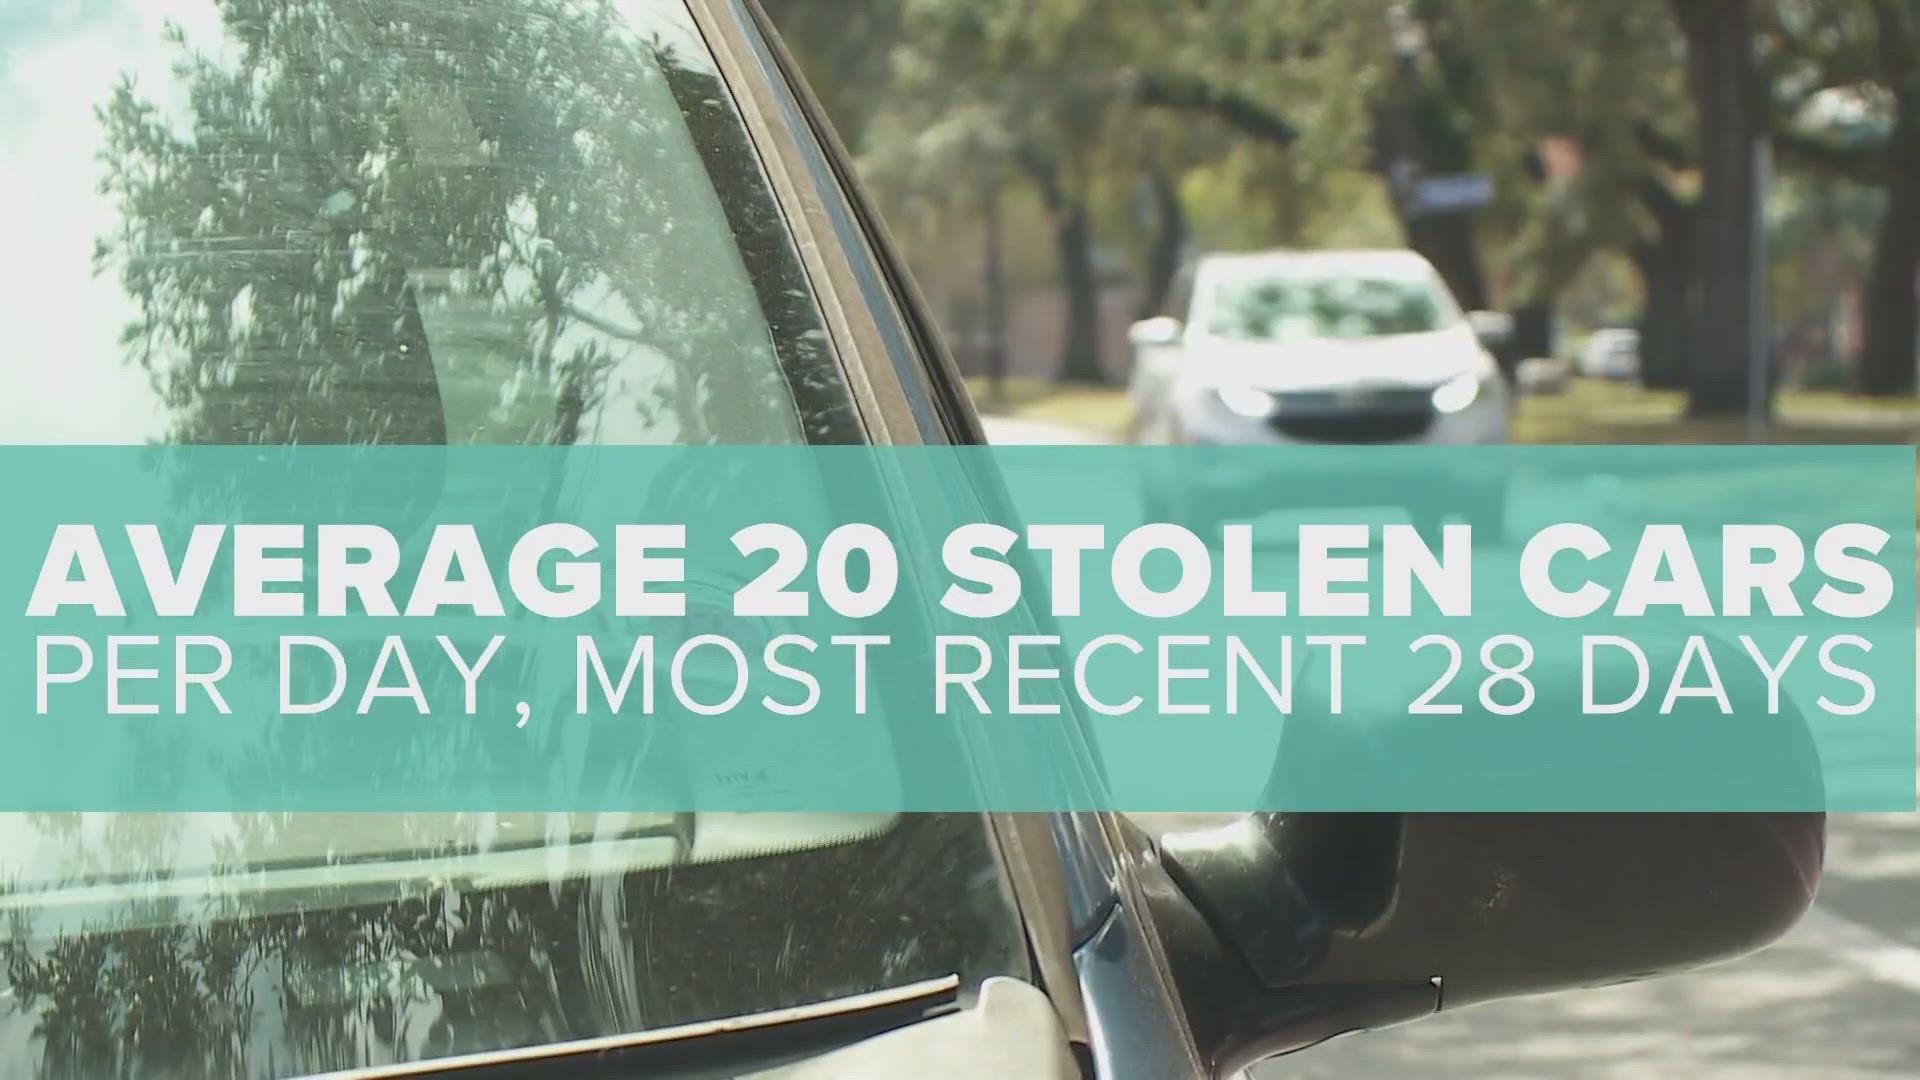 1,948 cars have been stolen in New Orleans this year as of March 25.